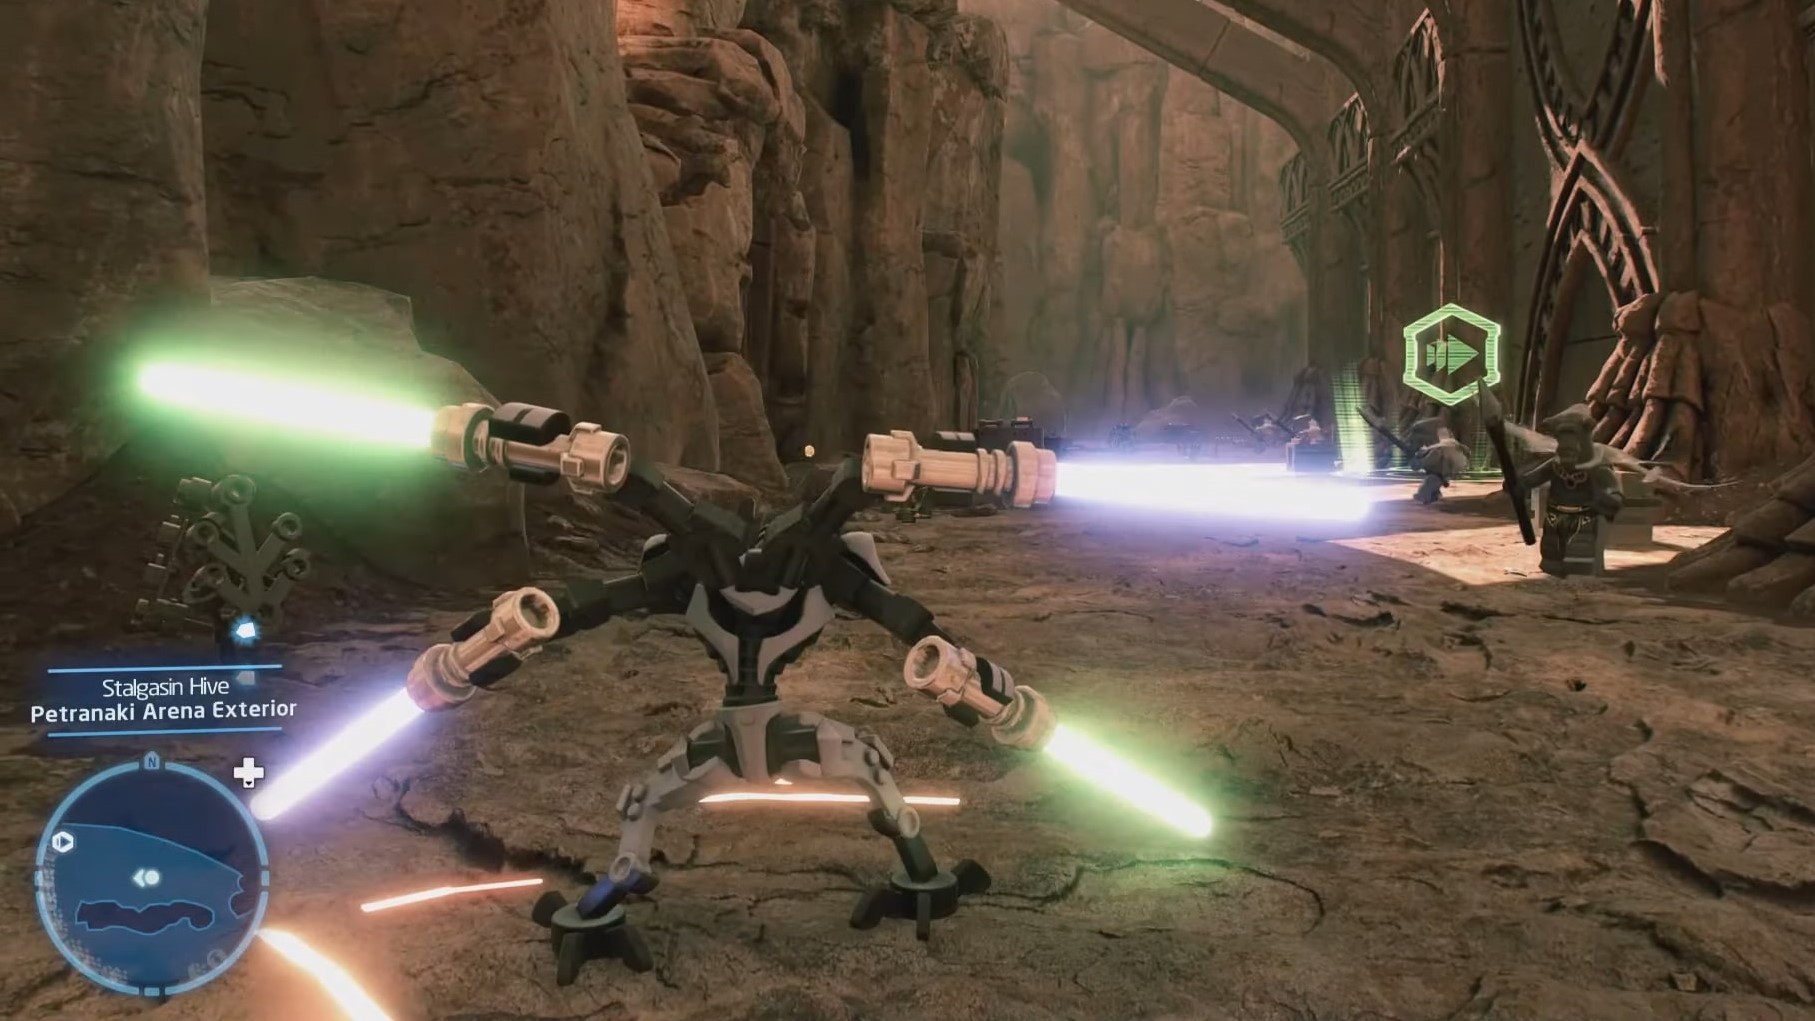 General Grievous as a playable character in The Skywalker Saga.